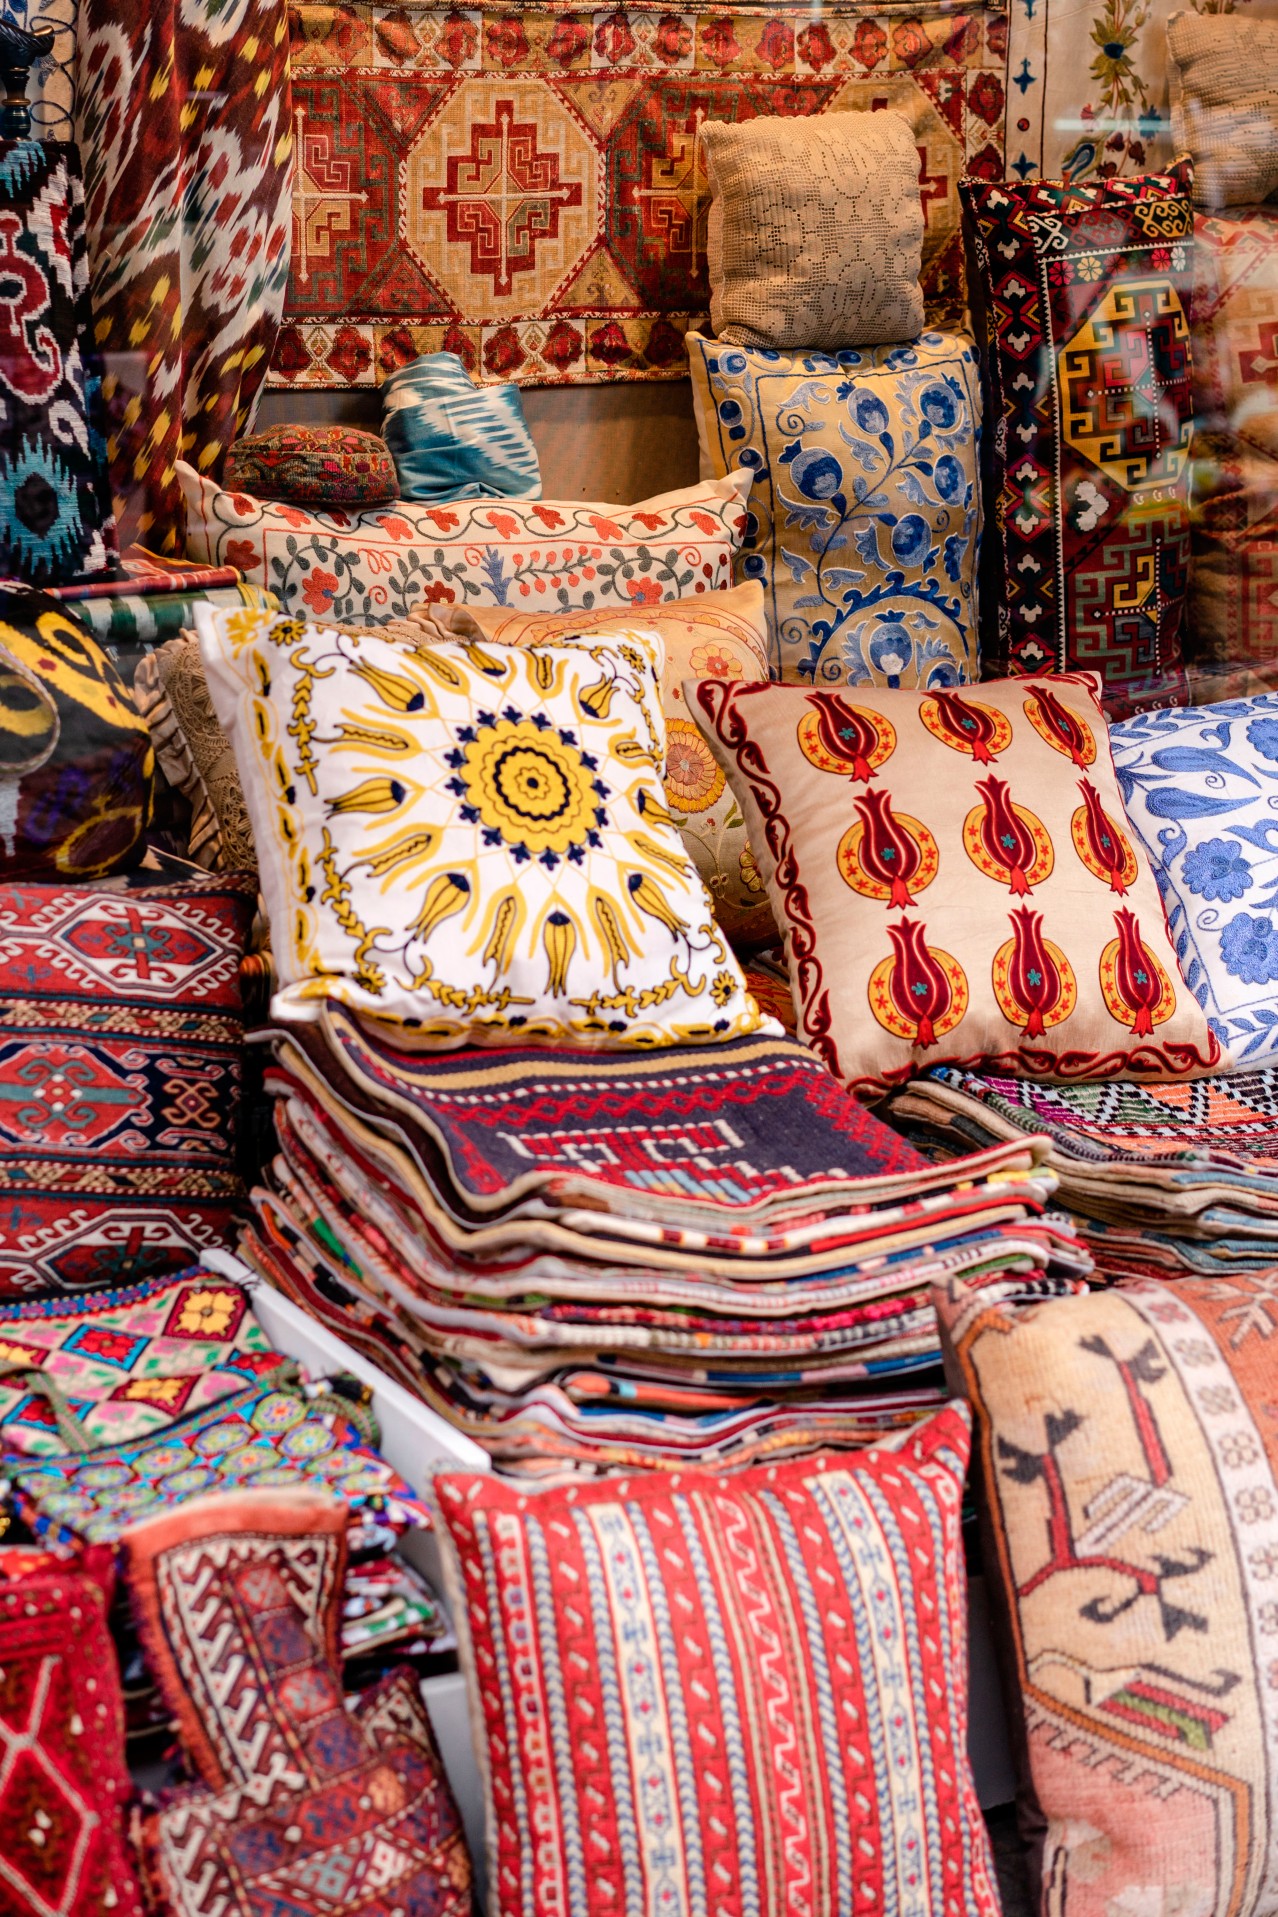 Turkish pillows and pillowcases in the store